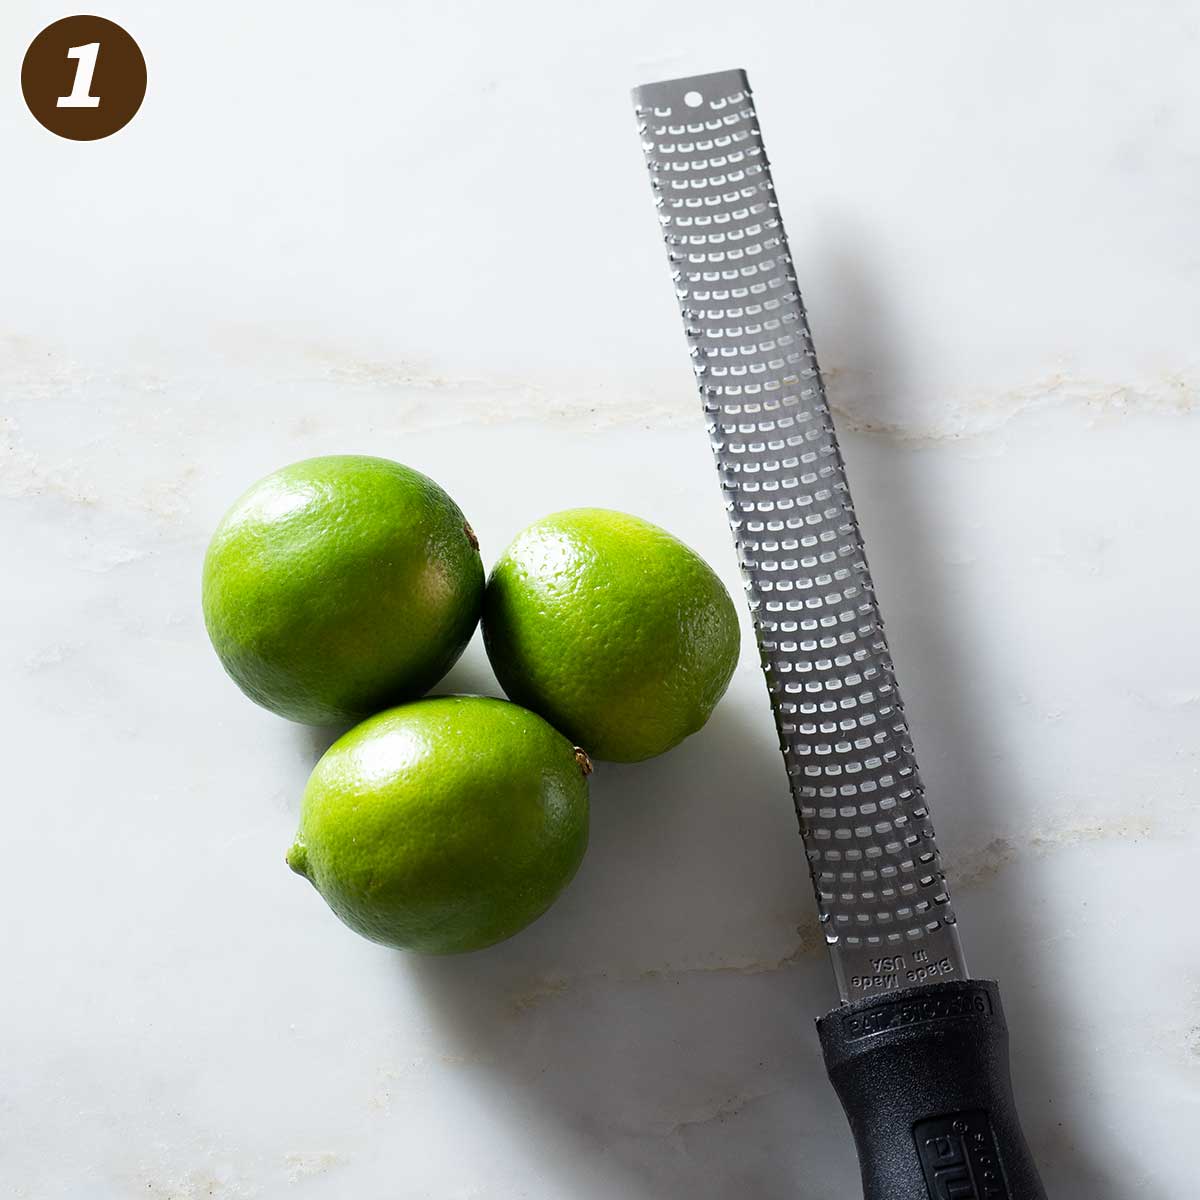 Three limes and a citrus zester.